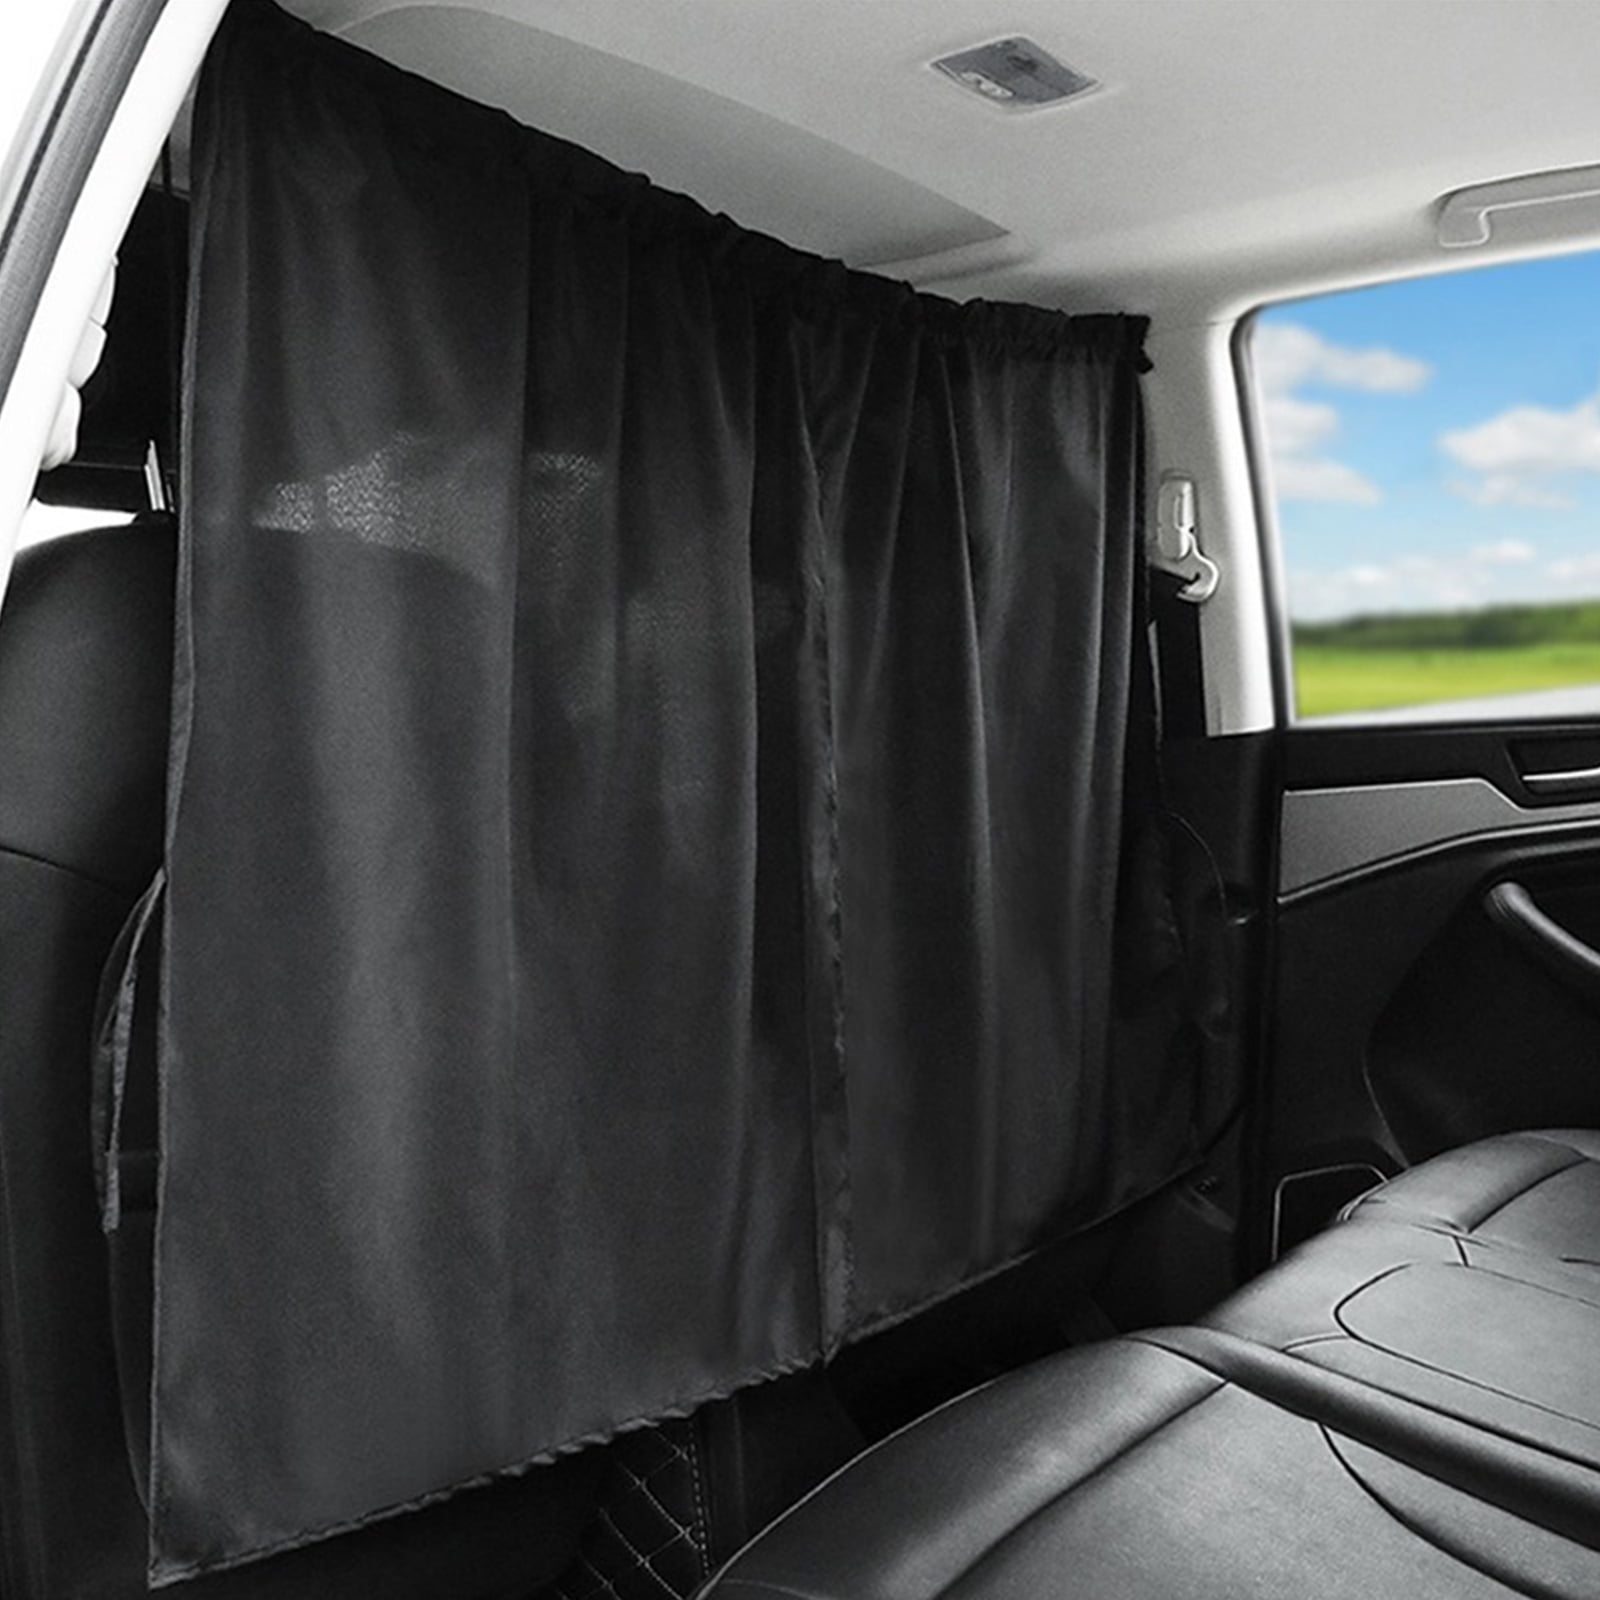 Universal Car Shade Windshield Curtains Fit for 99% Car Front Window Trucks and SUVs Sushiyi Sun Shade for Car Side Window 2 Pack Breathable Mesh Protect Kid/Pet Form Sun Glare and UV Ray